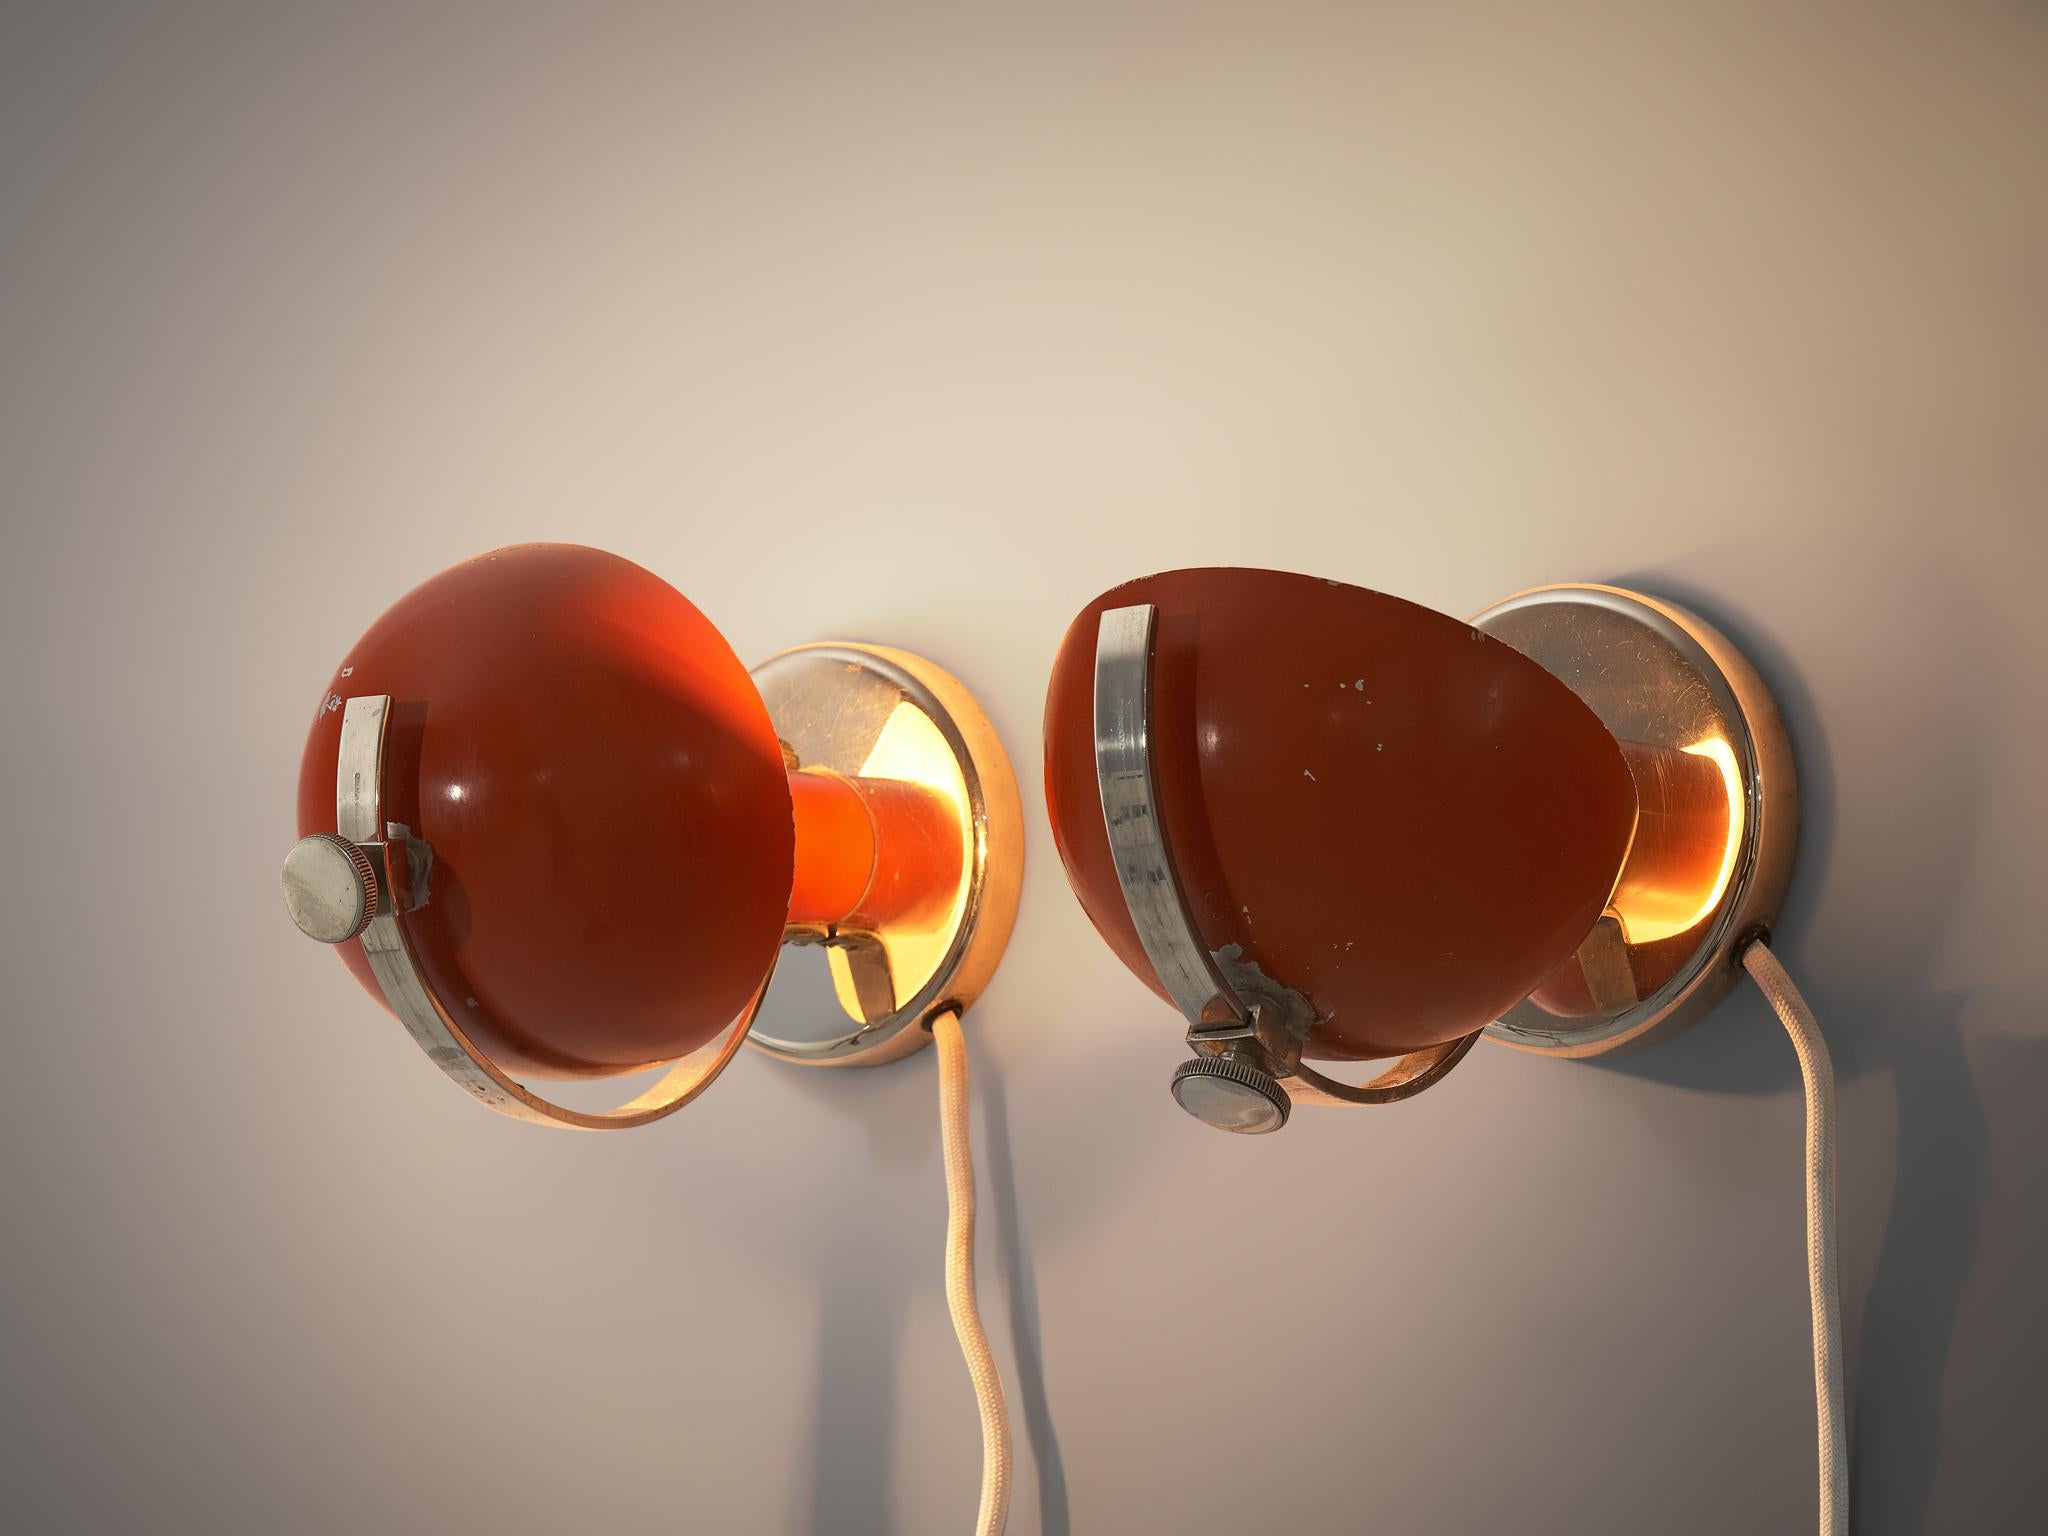 Erik Tidstrand for Nordiska Kompaniet, pair of wall or table lamps, metal, Sweden, 1930s

A refined pair of functionalist wall or table lamps designed by Erik Tidstrand. These lights are produced in Sweden by Nordiska Kompaniet during the 1930s.